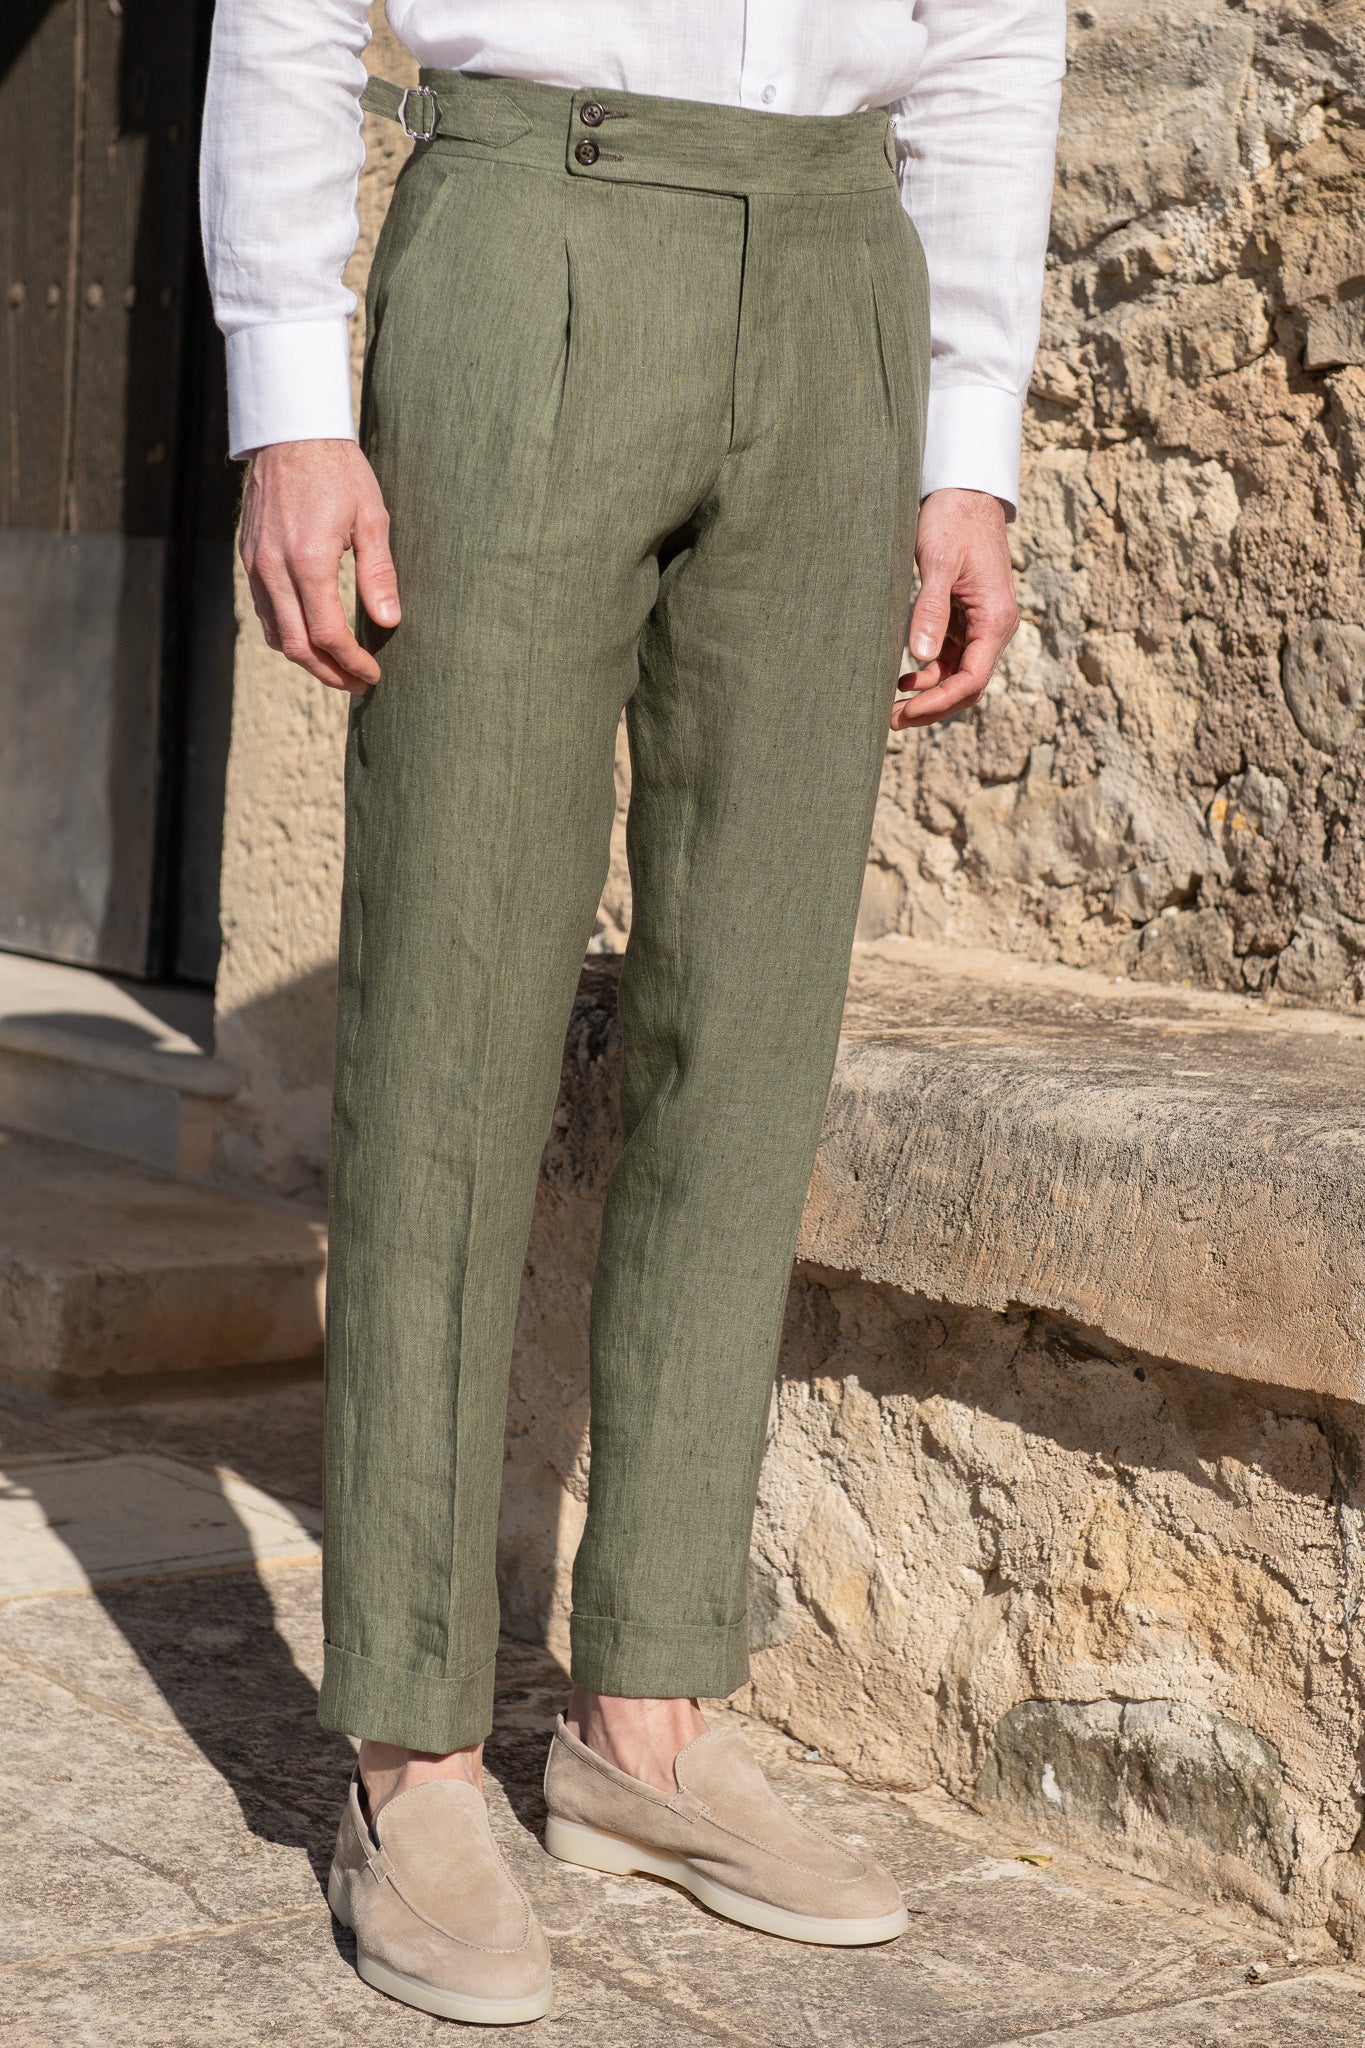 Green linen trousers "Soragna Capsule Collection" - Made in Italy